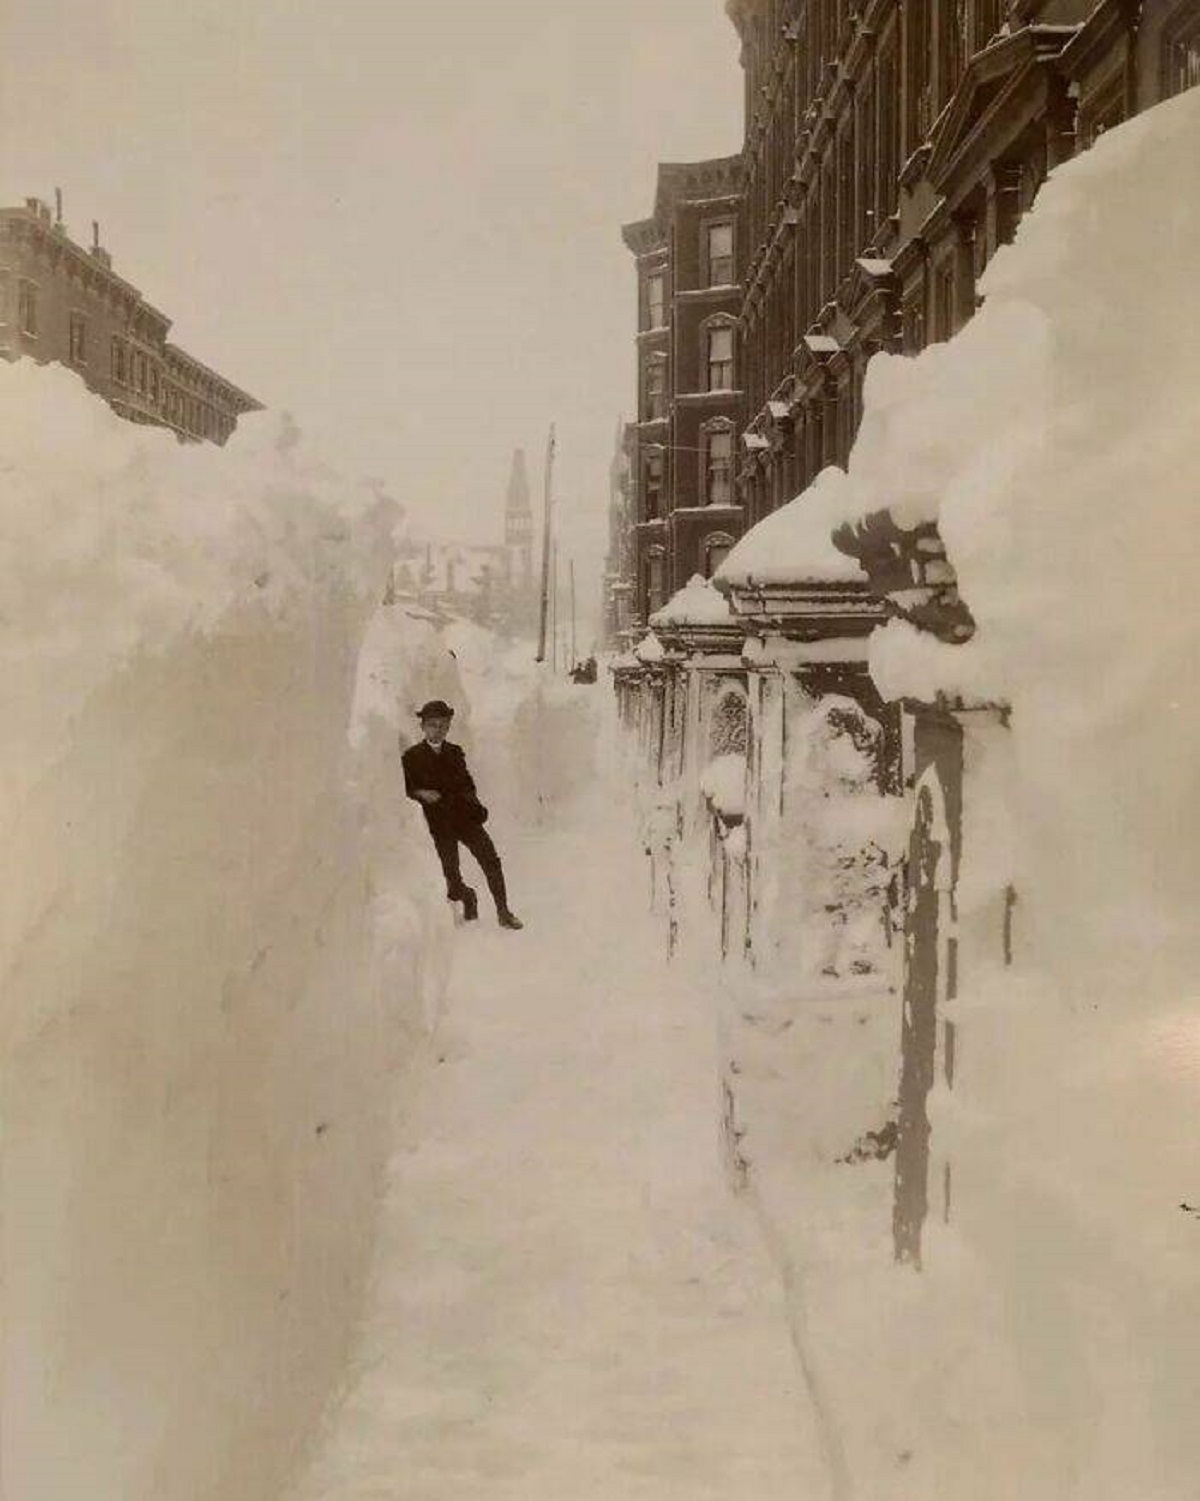 "The Great Blizzard Of 1888 Stands As One Of The Most Severe Blizzards Ever Recorded In American History"

"This tempest rendered the East Coast immobile, depositing snow ranging from 10 to 58 inches (25 to 147 cm) across various regions of New Jersey, New York, Massachusetts, Rhode Island, and Connecticut. The included photograph captures an unidentified young man positioned within a cleared space on Madison Avenue and 40th Street in New York City.

The storm's impact was far-reaching: railways ceased operations, and individuals were confined to their residences for up to a week. Telegraph and railway lines suffered disruptions, prompting the decision to relocate these essential infrastructures underground."